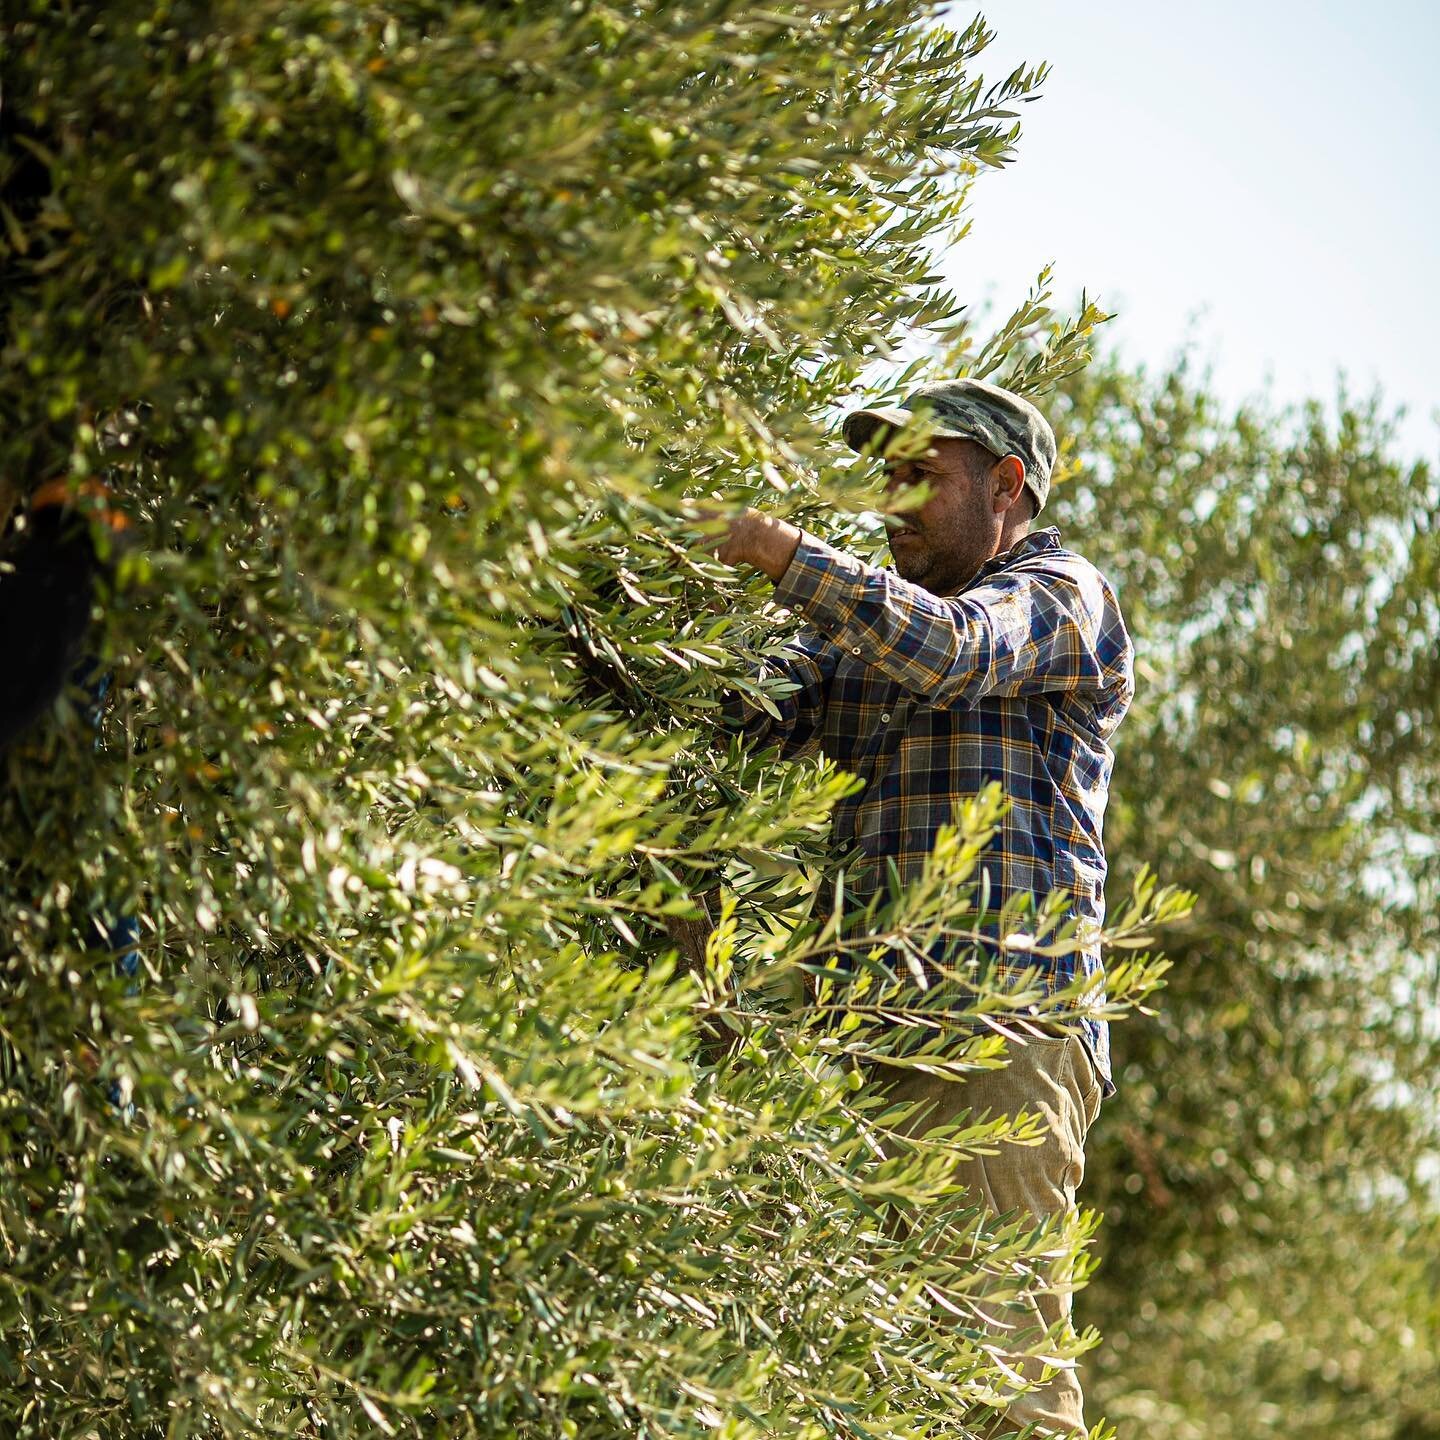 And with that our 2021 Olive Harvest comes to a close. Did you know that the olive harvest yield varies greatly from year to year depending on such things as that years&rsquo; weather and rainfall, but primarily because olives are an alternate bearin